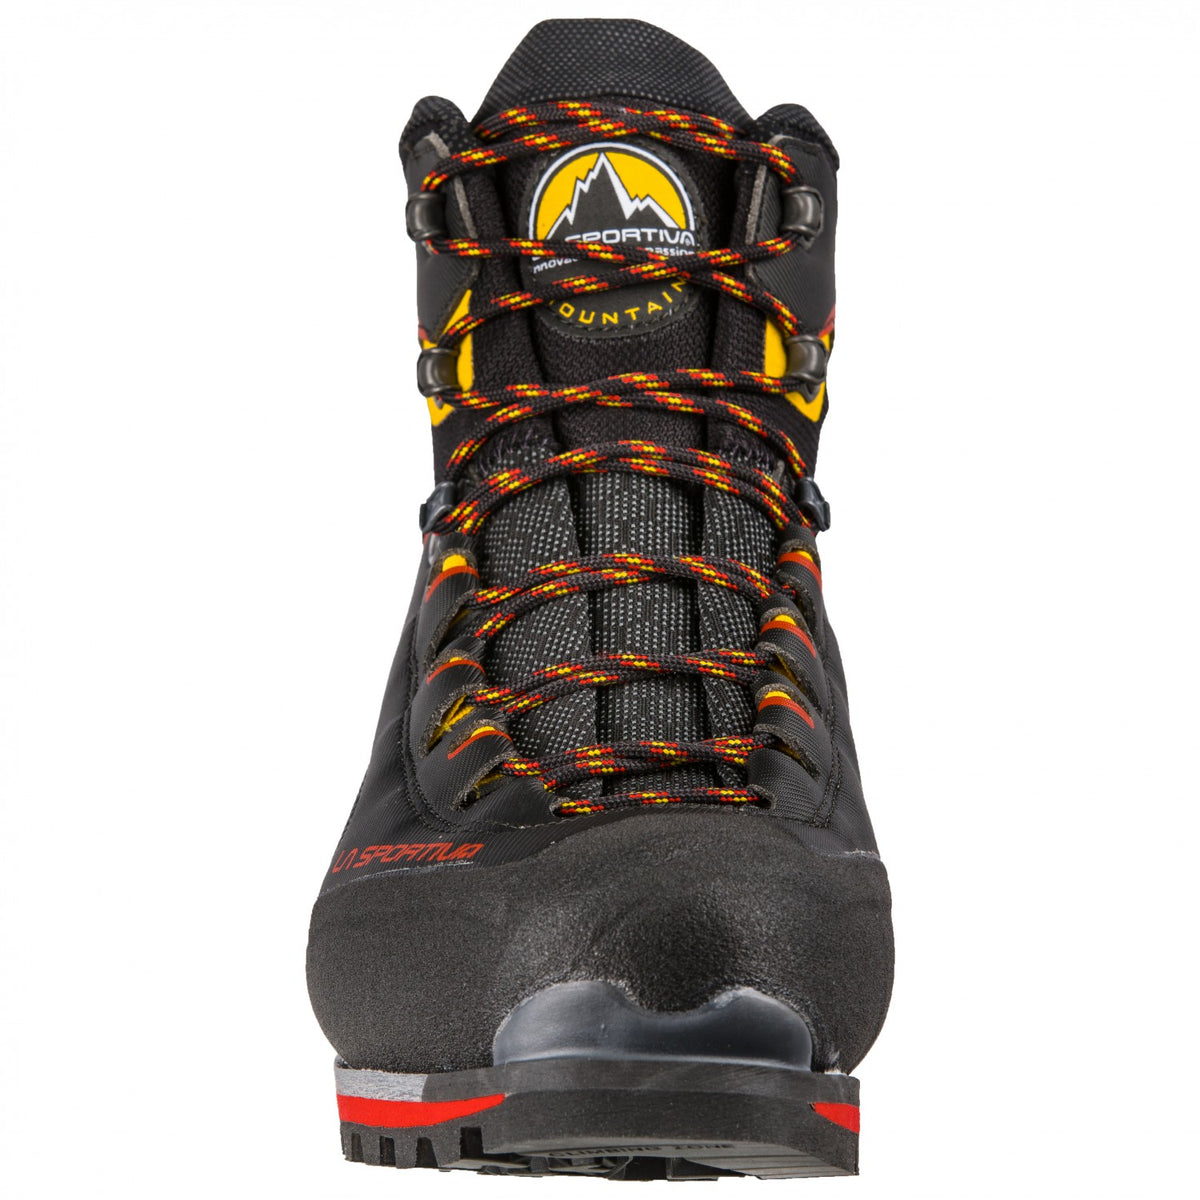 La Sportiva Trango Tower Extreme GTX mountaineering boot, view from the front showing the laces